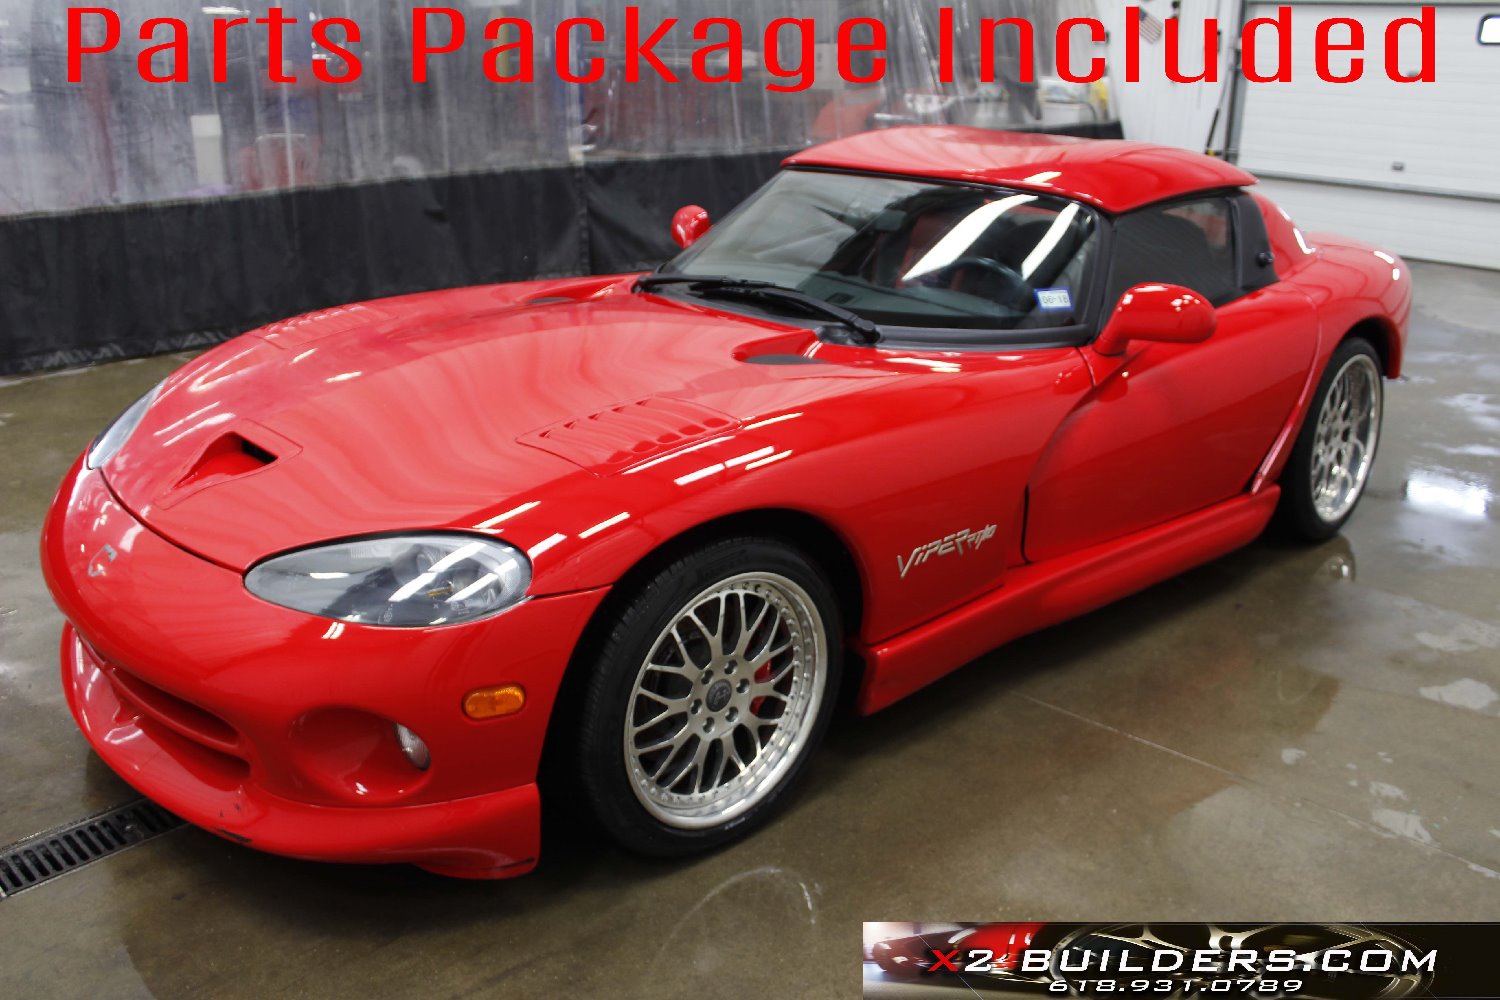 2000 Dodge Viper RT/10 Supercharged